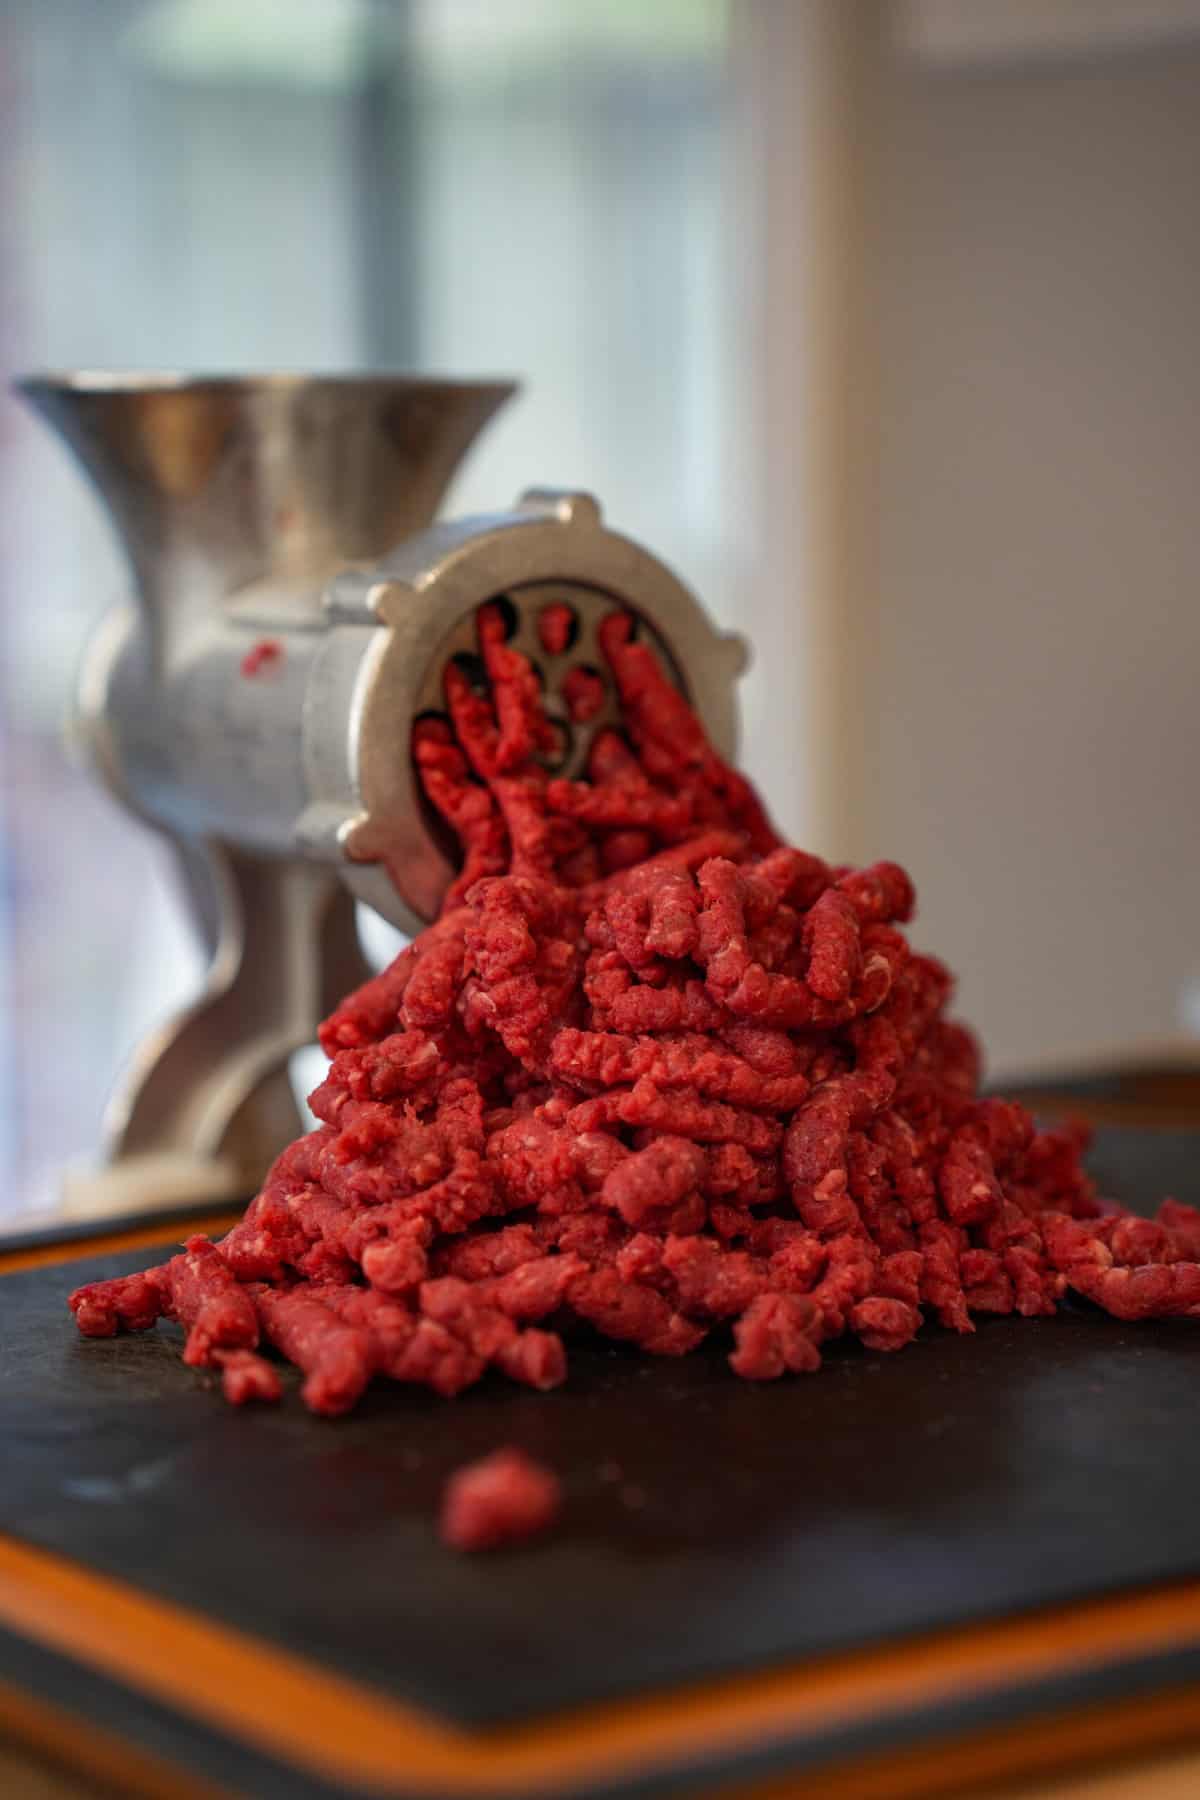 Grinding up the beef so that we can stuff it in the hot dogs.